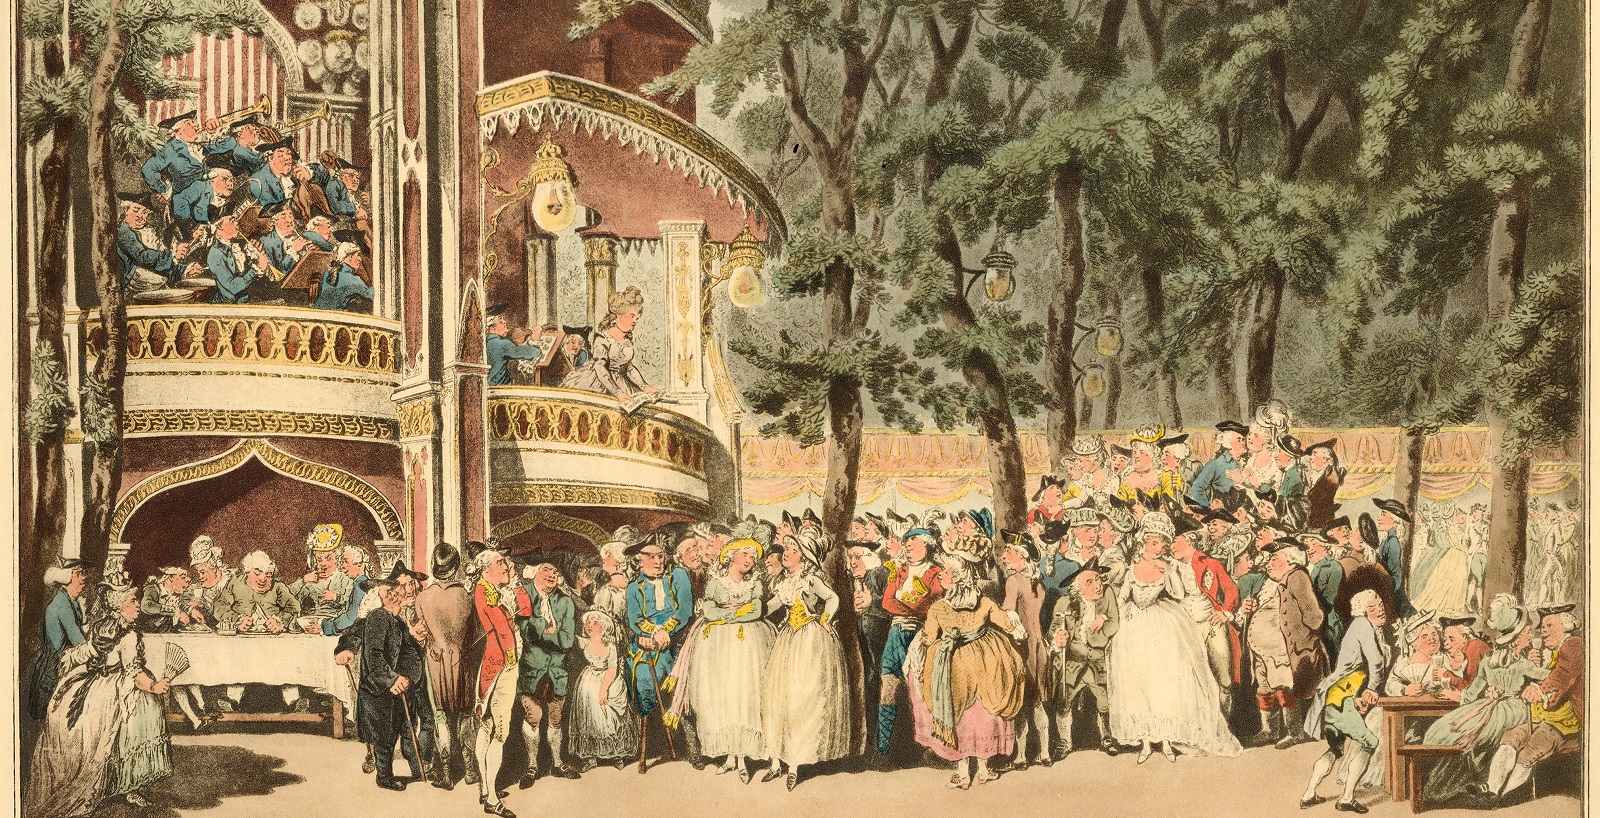 Visitors to Vauxhall Gardens including Dr Johnson & Oliver Goldsmith listening to the music